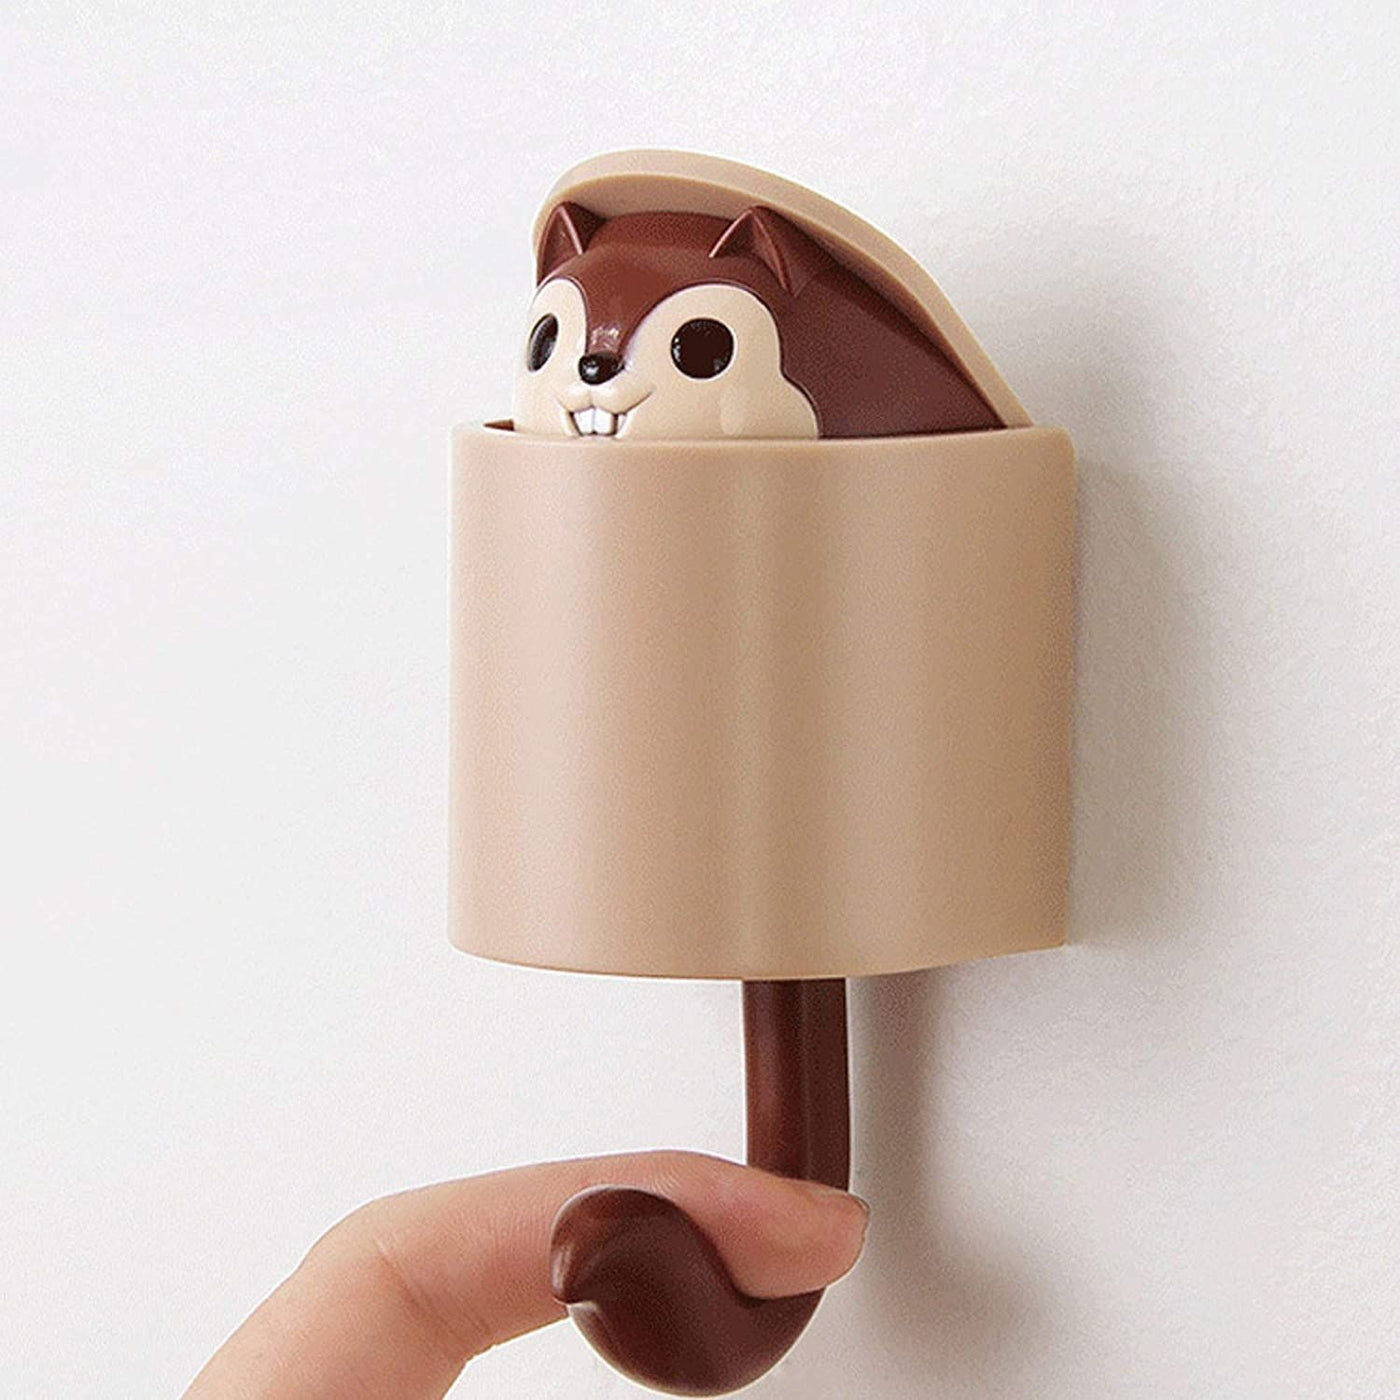 Squirrel Shape Adhesive Hook 2 Pieces